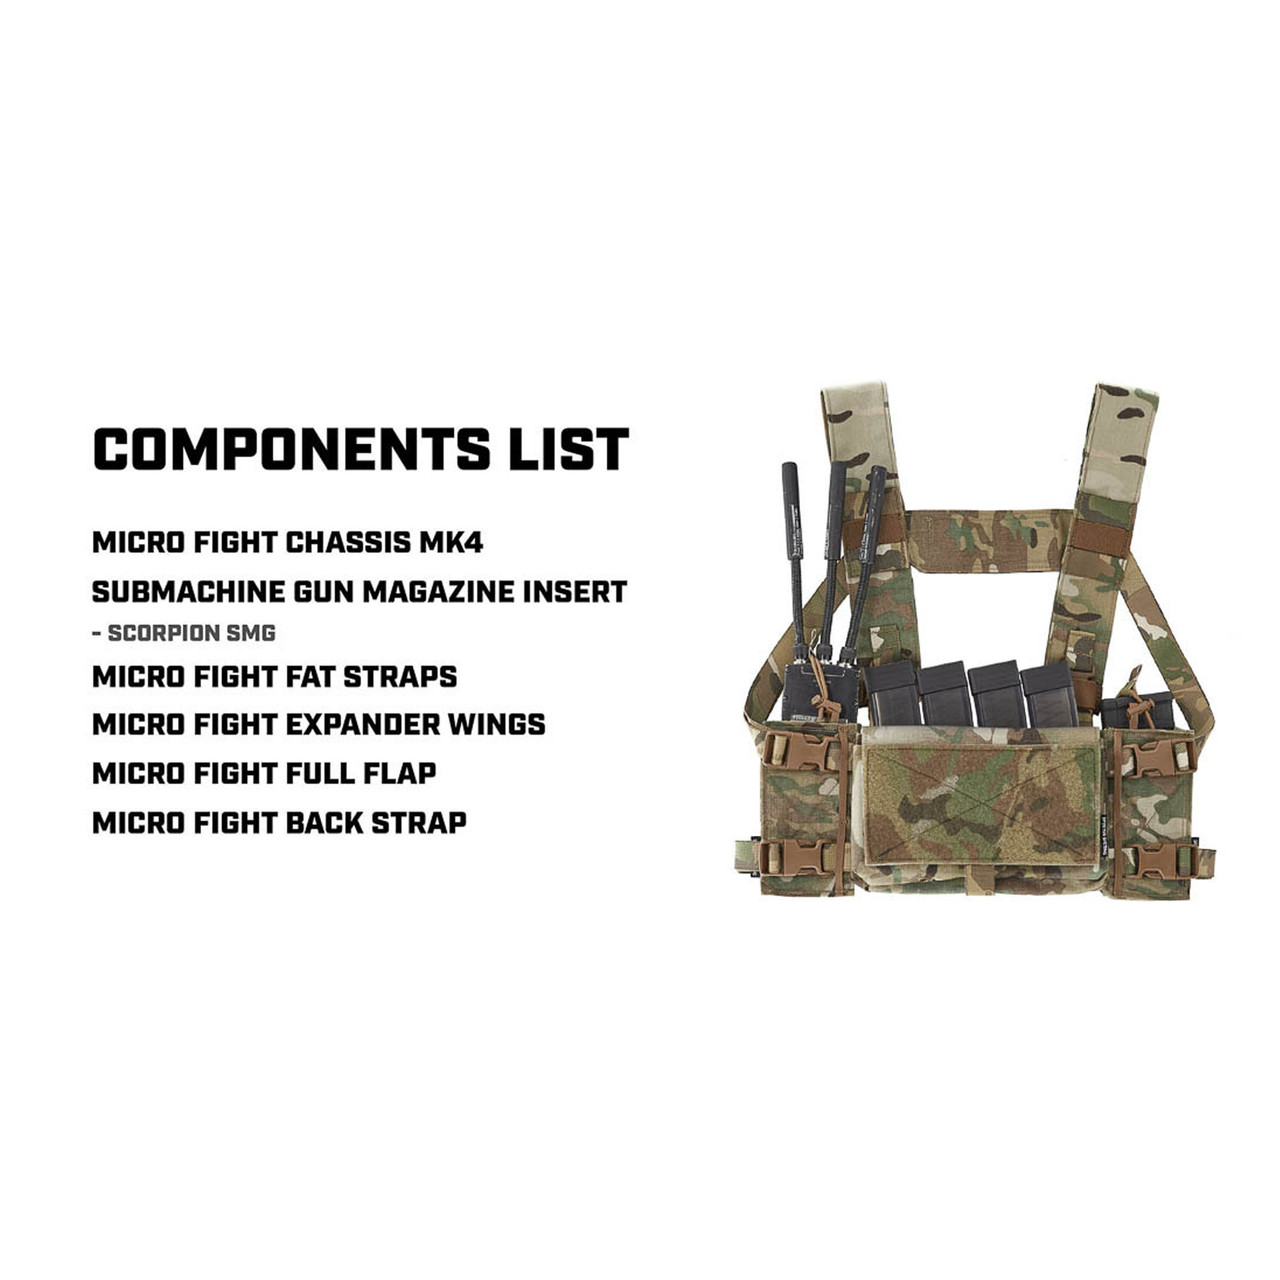 Bank Robber Chest Rig - Spiritus Systems